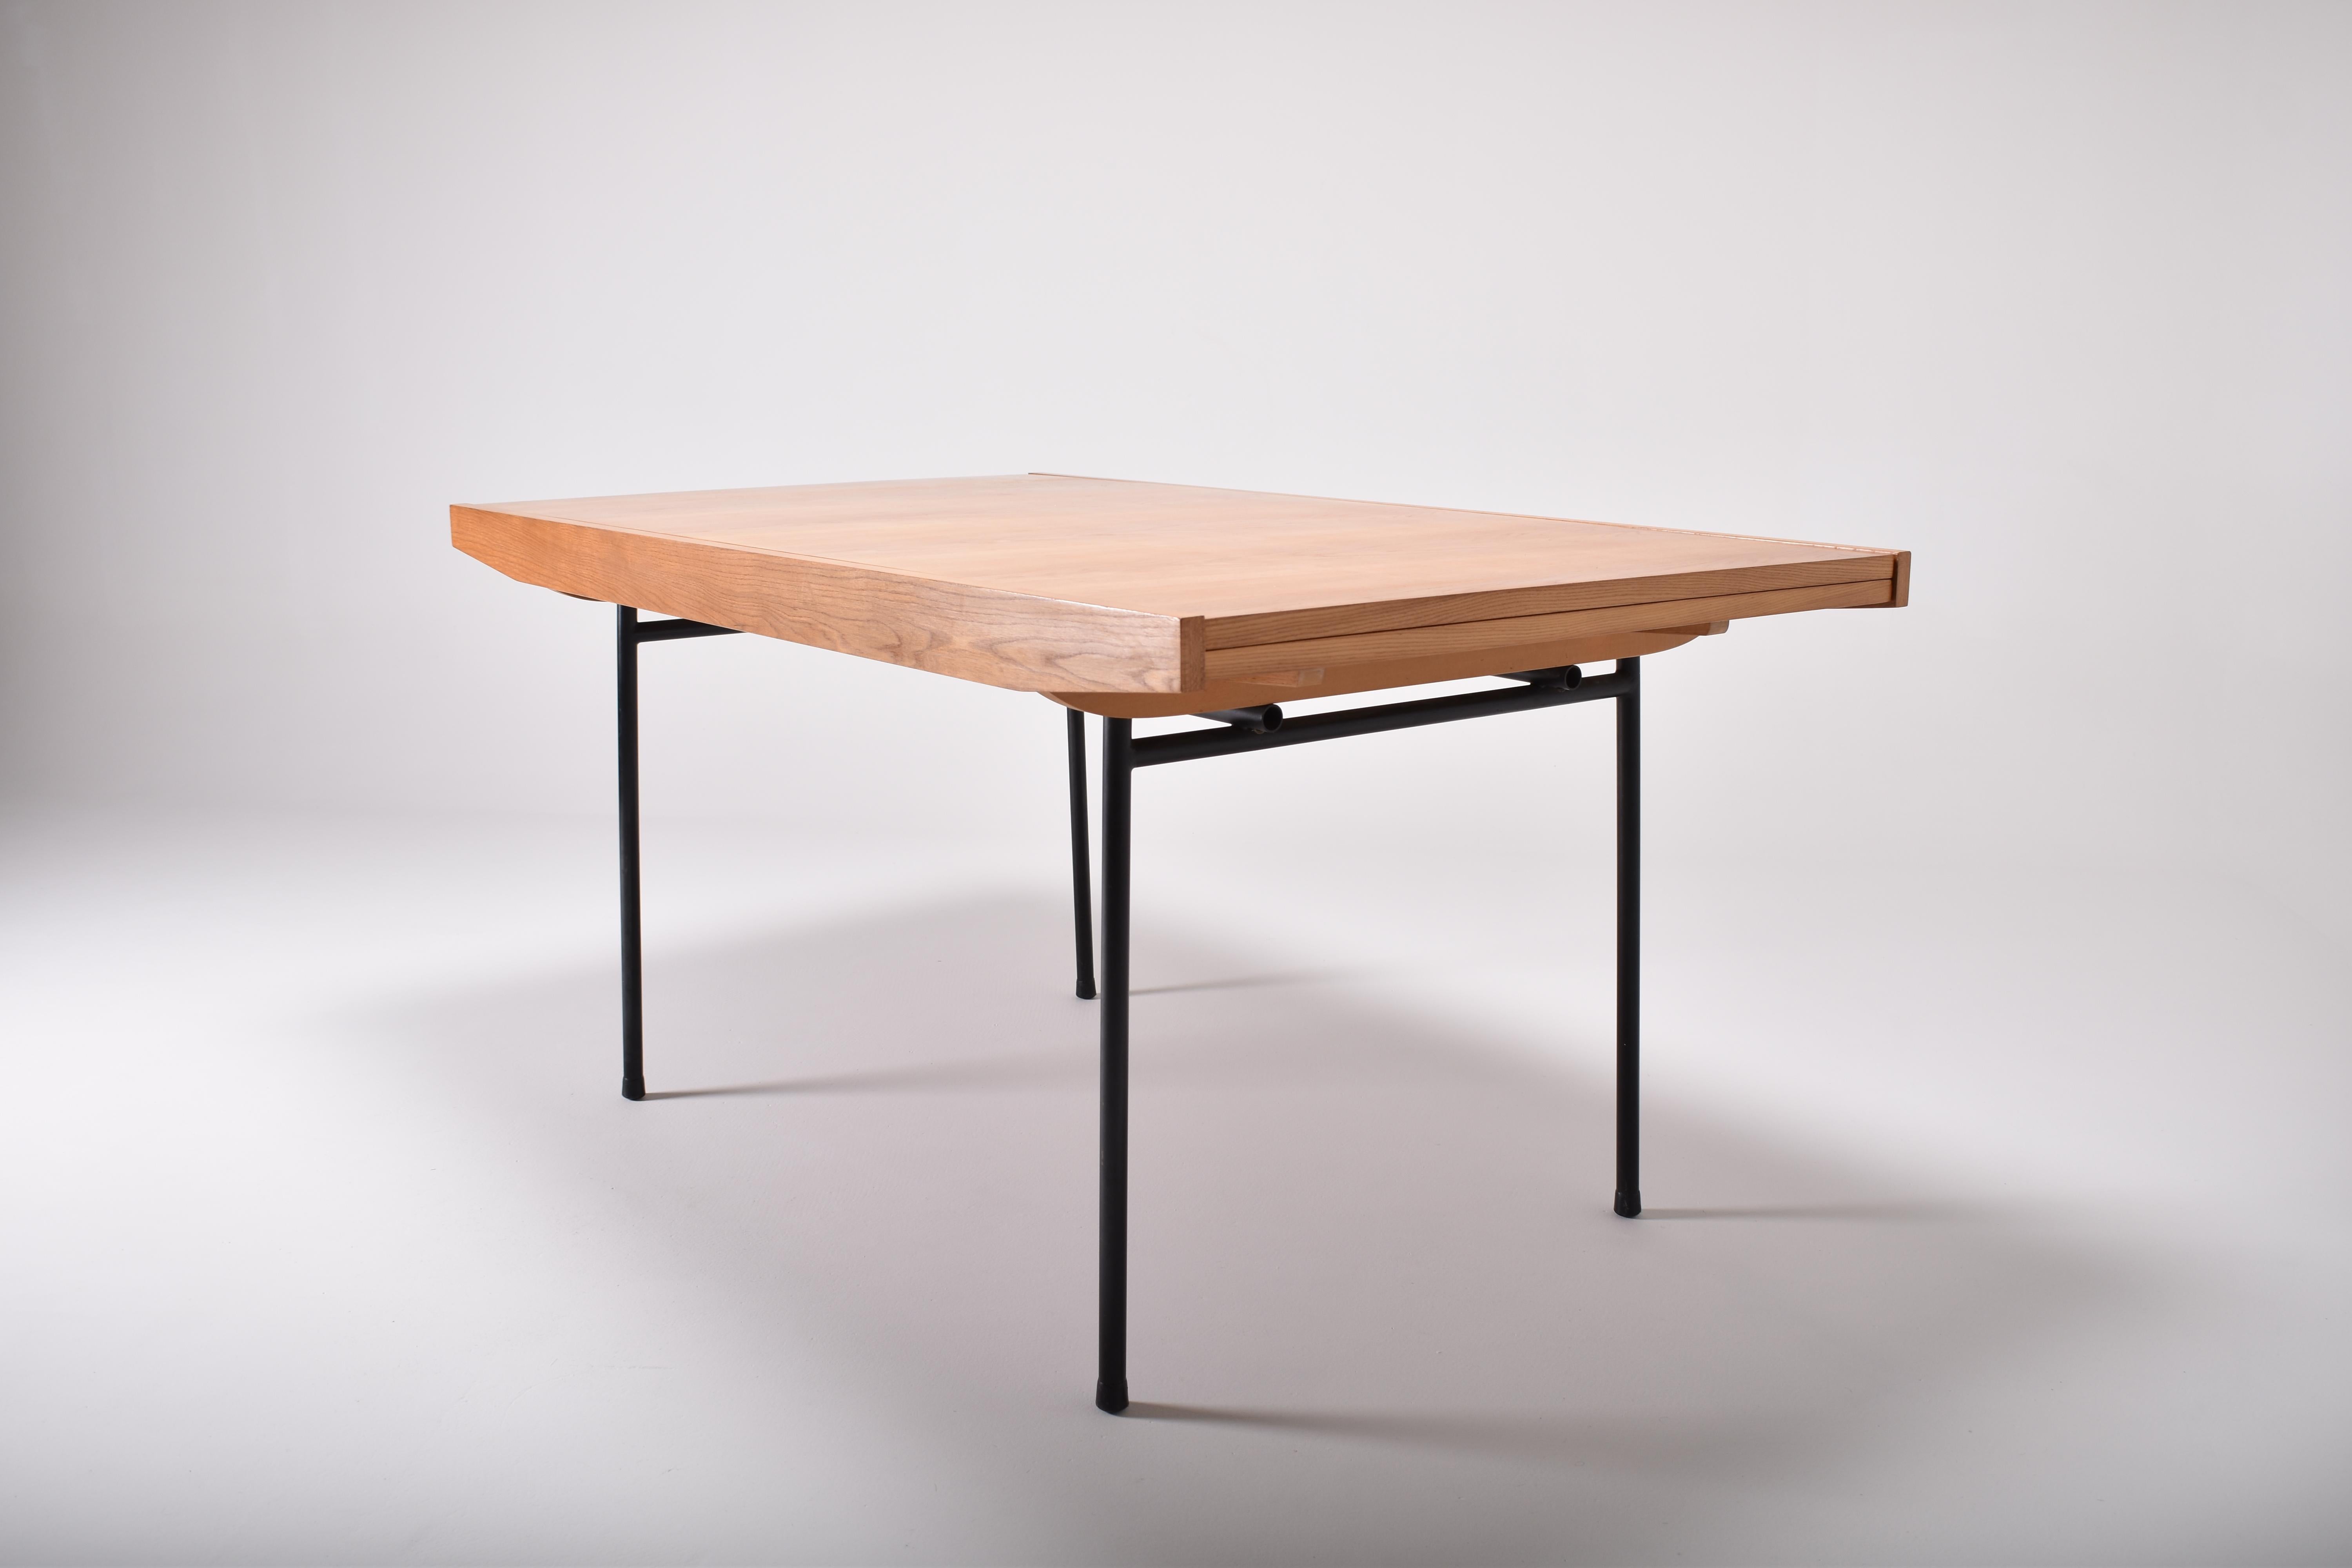 Model 324 elm dining table designed by Alain Richard and produced by Meubles TV, France in 1953.
This elegant table has two cherrywood extensions, each of 35 cm (13.8') increasing the length from 151 cm to 220 cm (60' to 87')
The elm top rests on